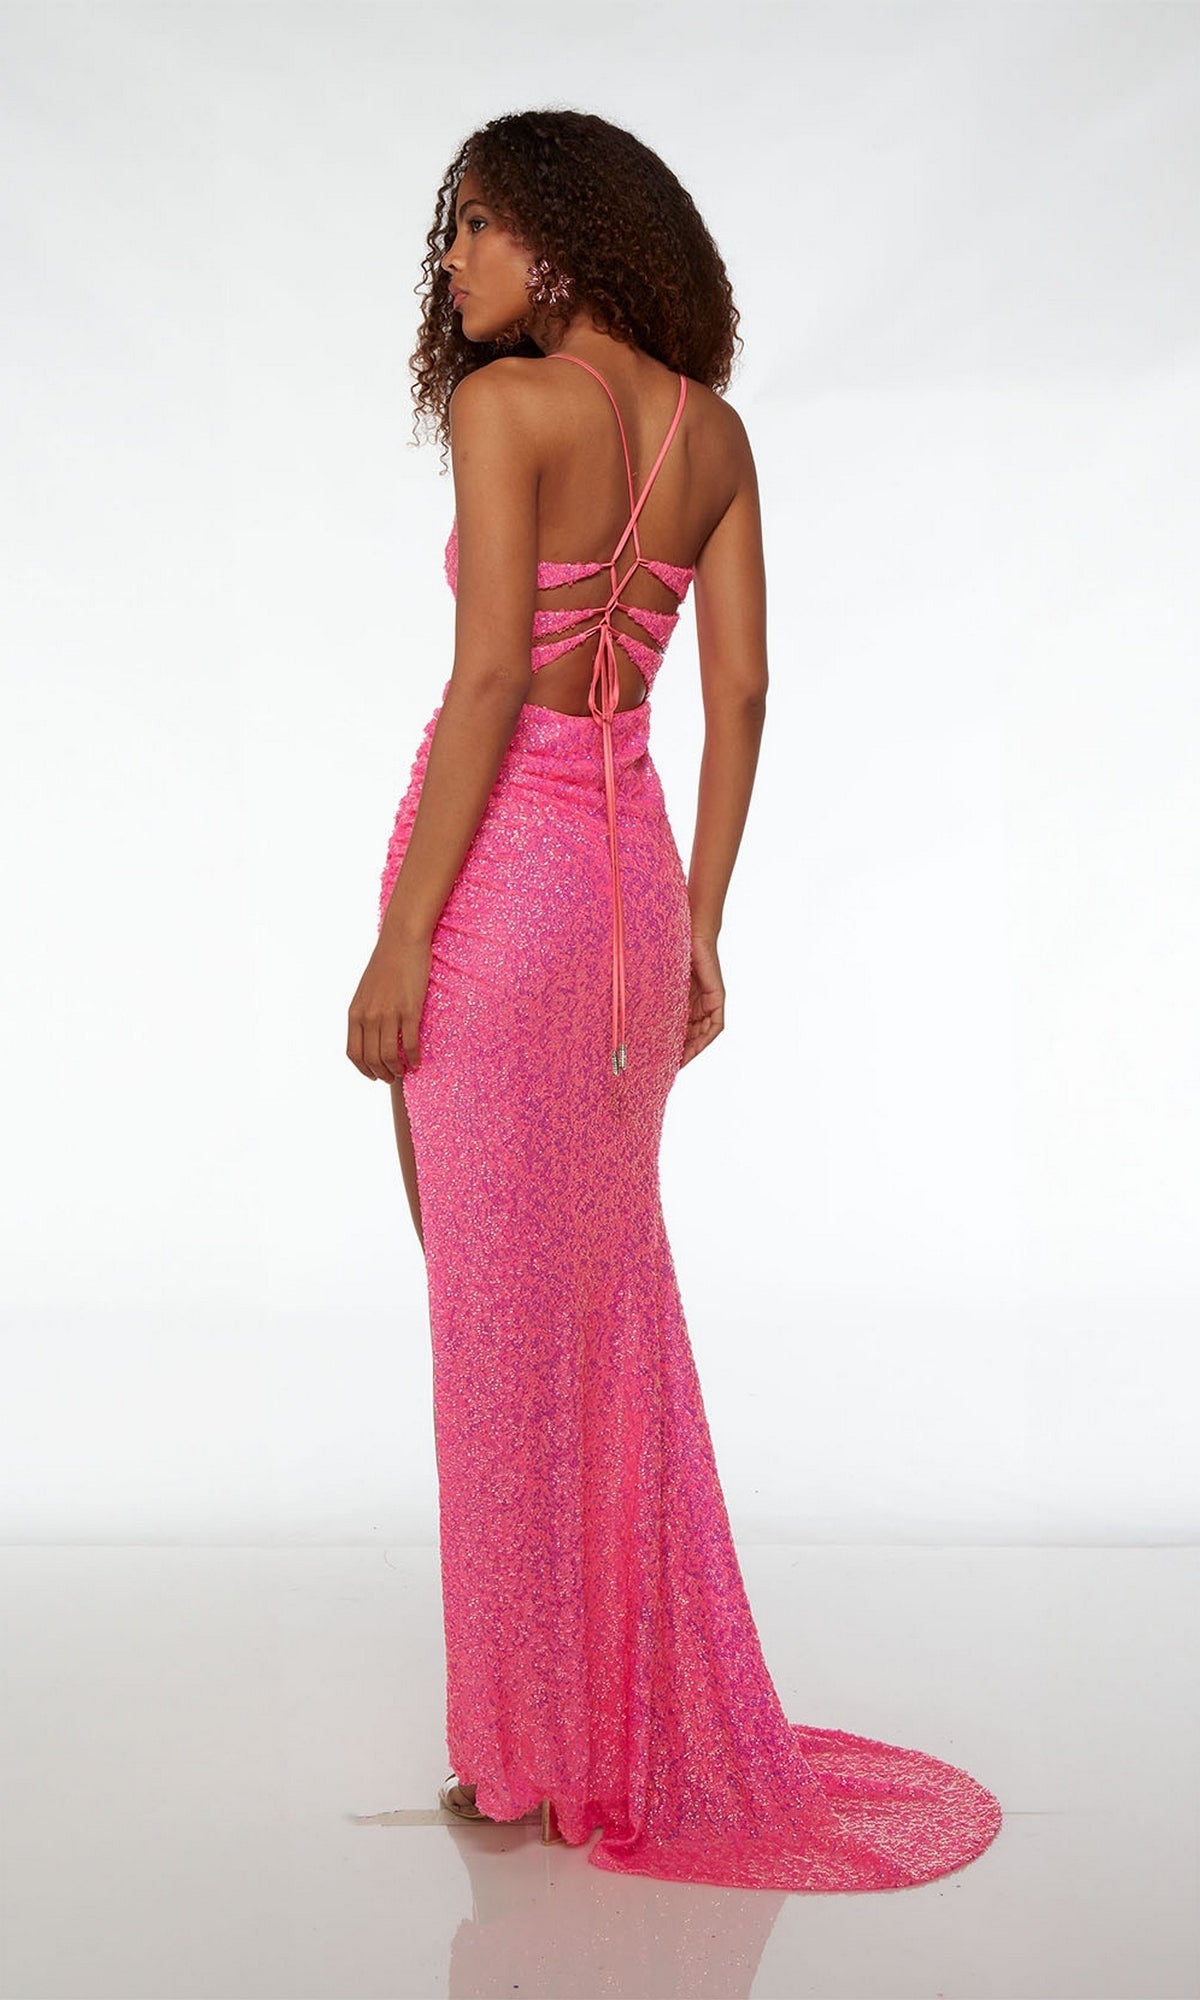 Strappy-Back Long Sequin Pink Prom Dress - PromGirl